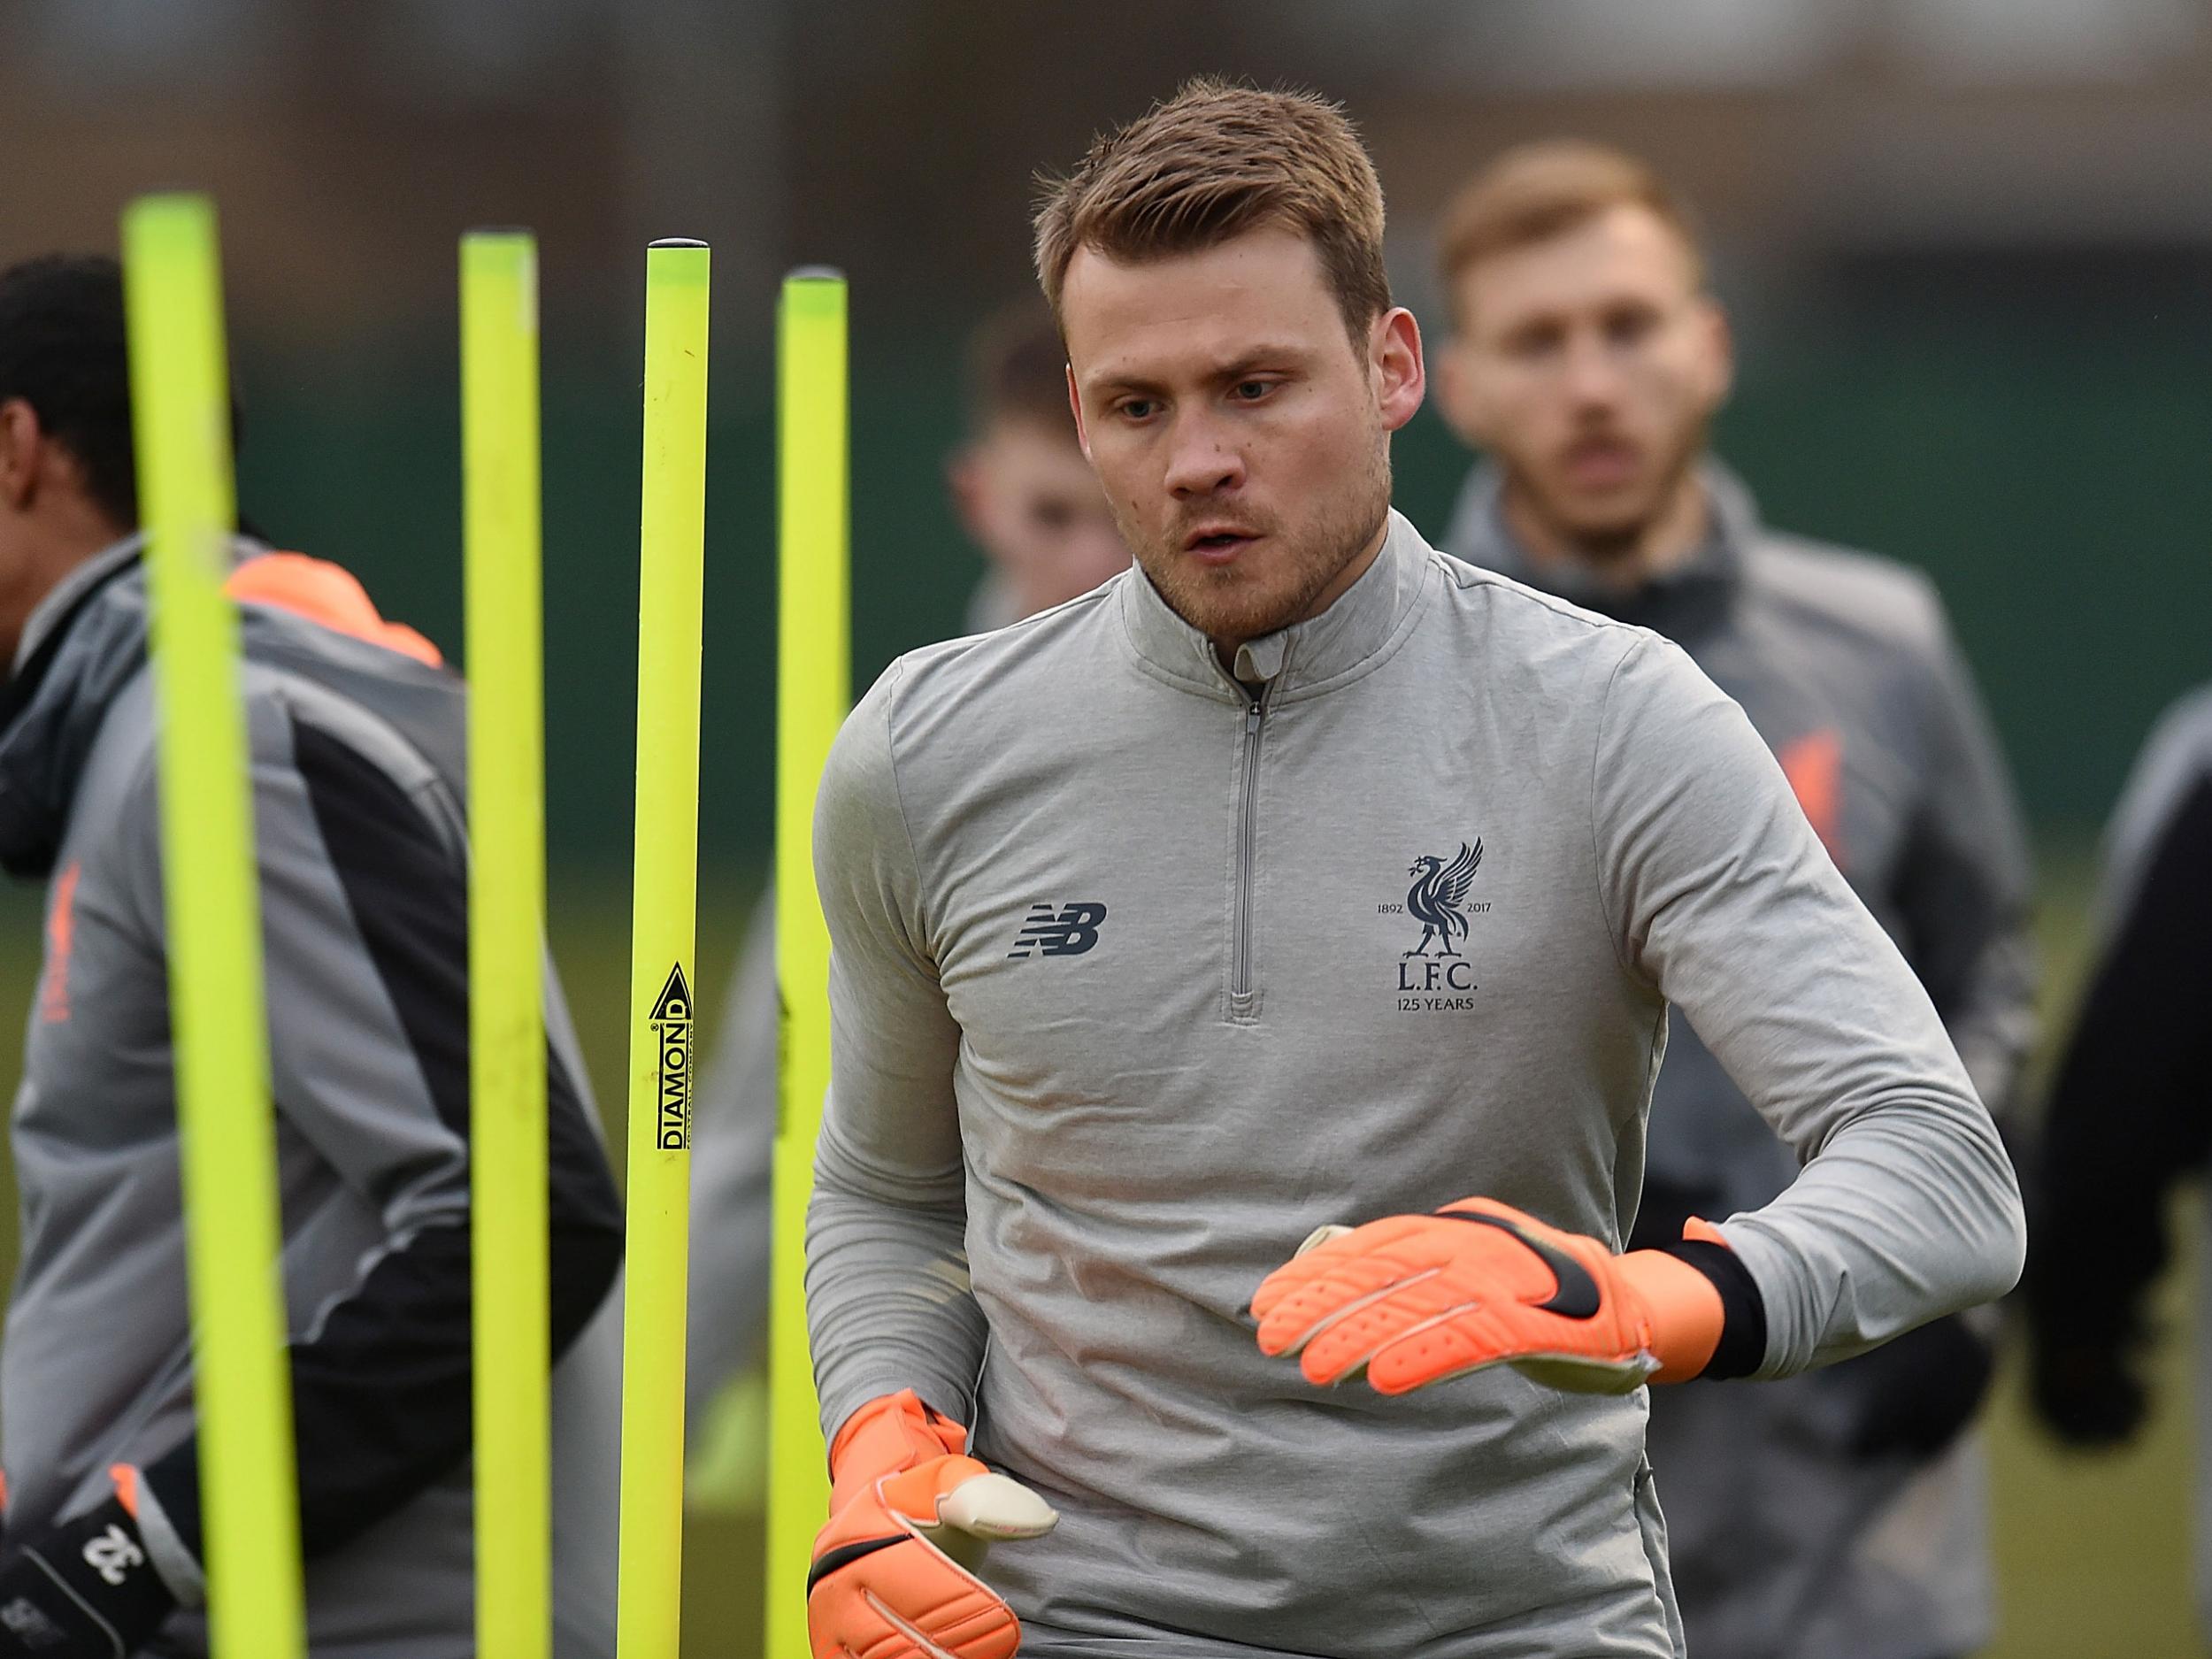 Simon Mignolet has only played twice for Liverpool since the turn of the year